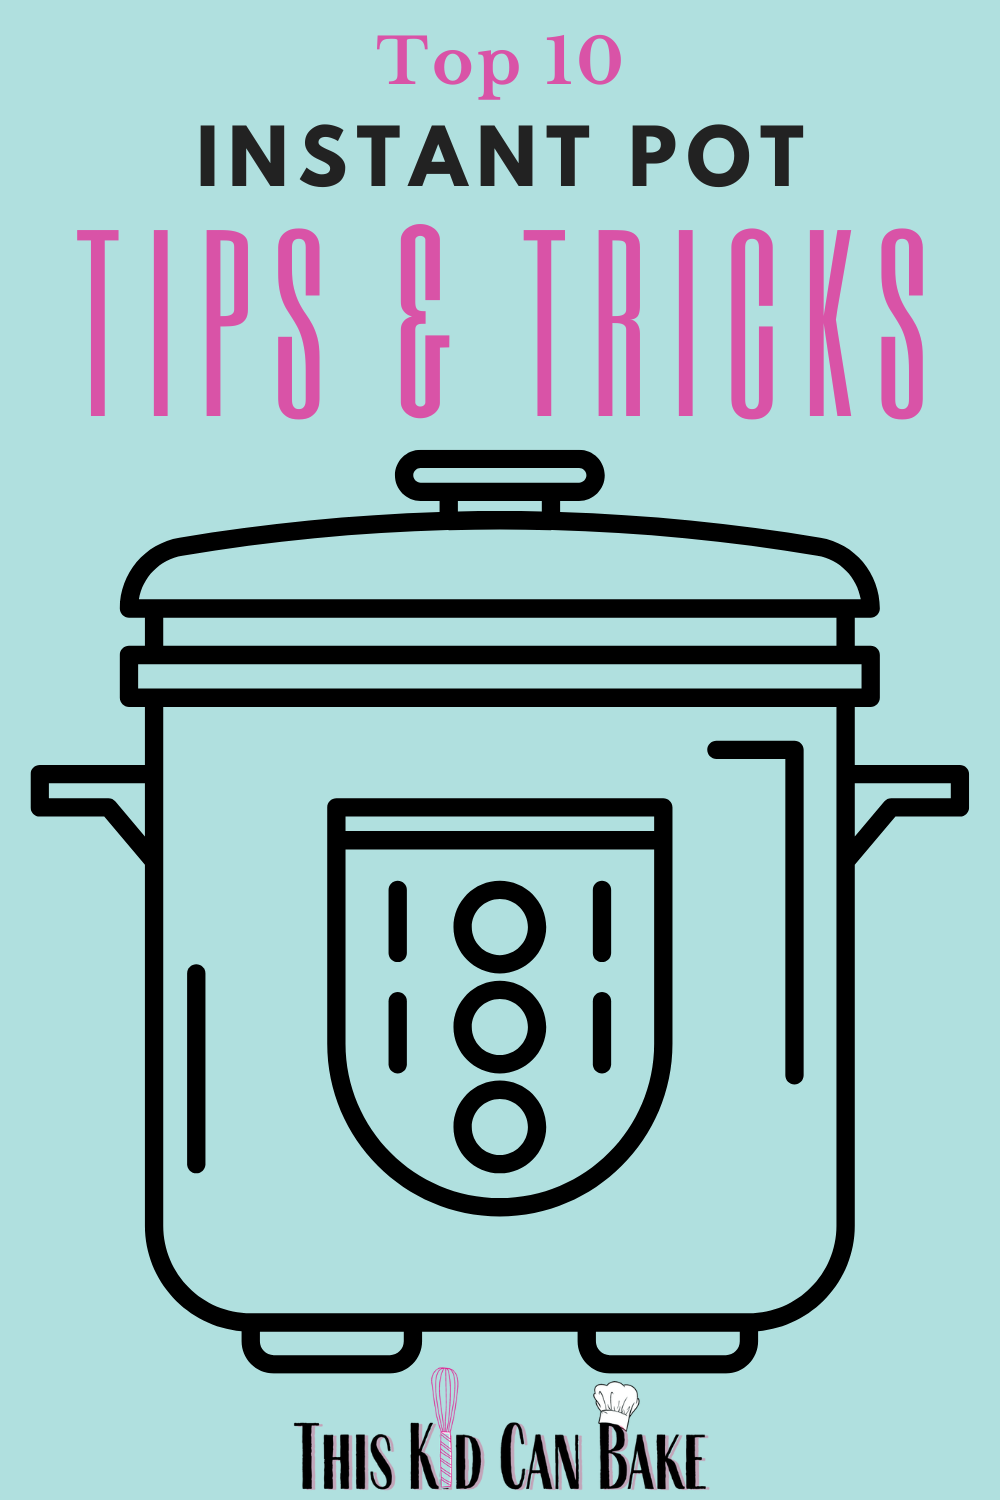 Top 10 Instant Pot Tips and Tricks